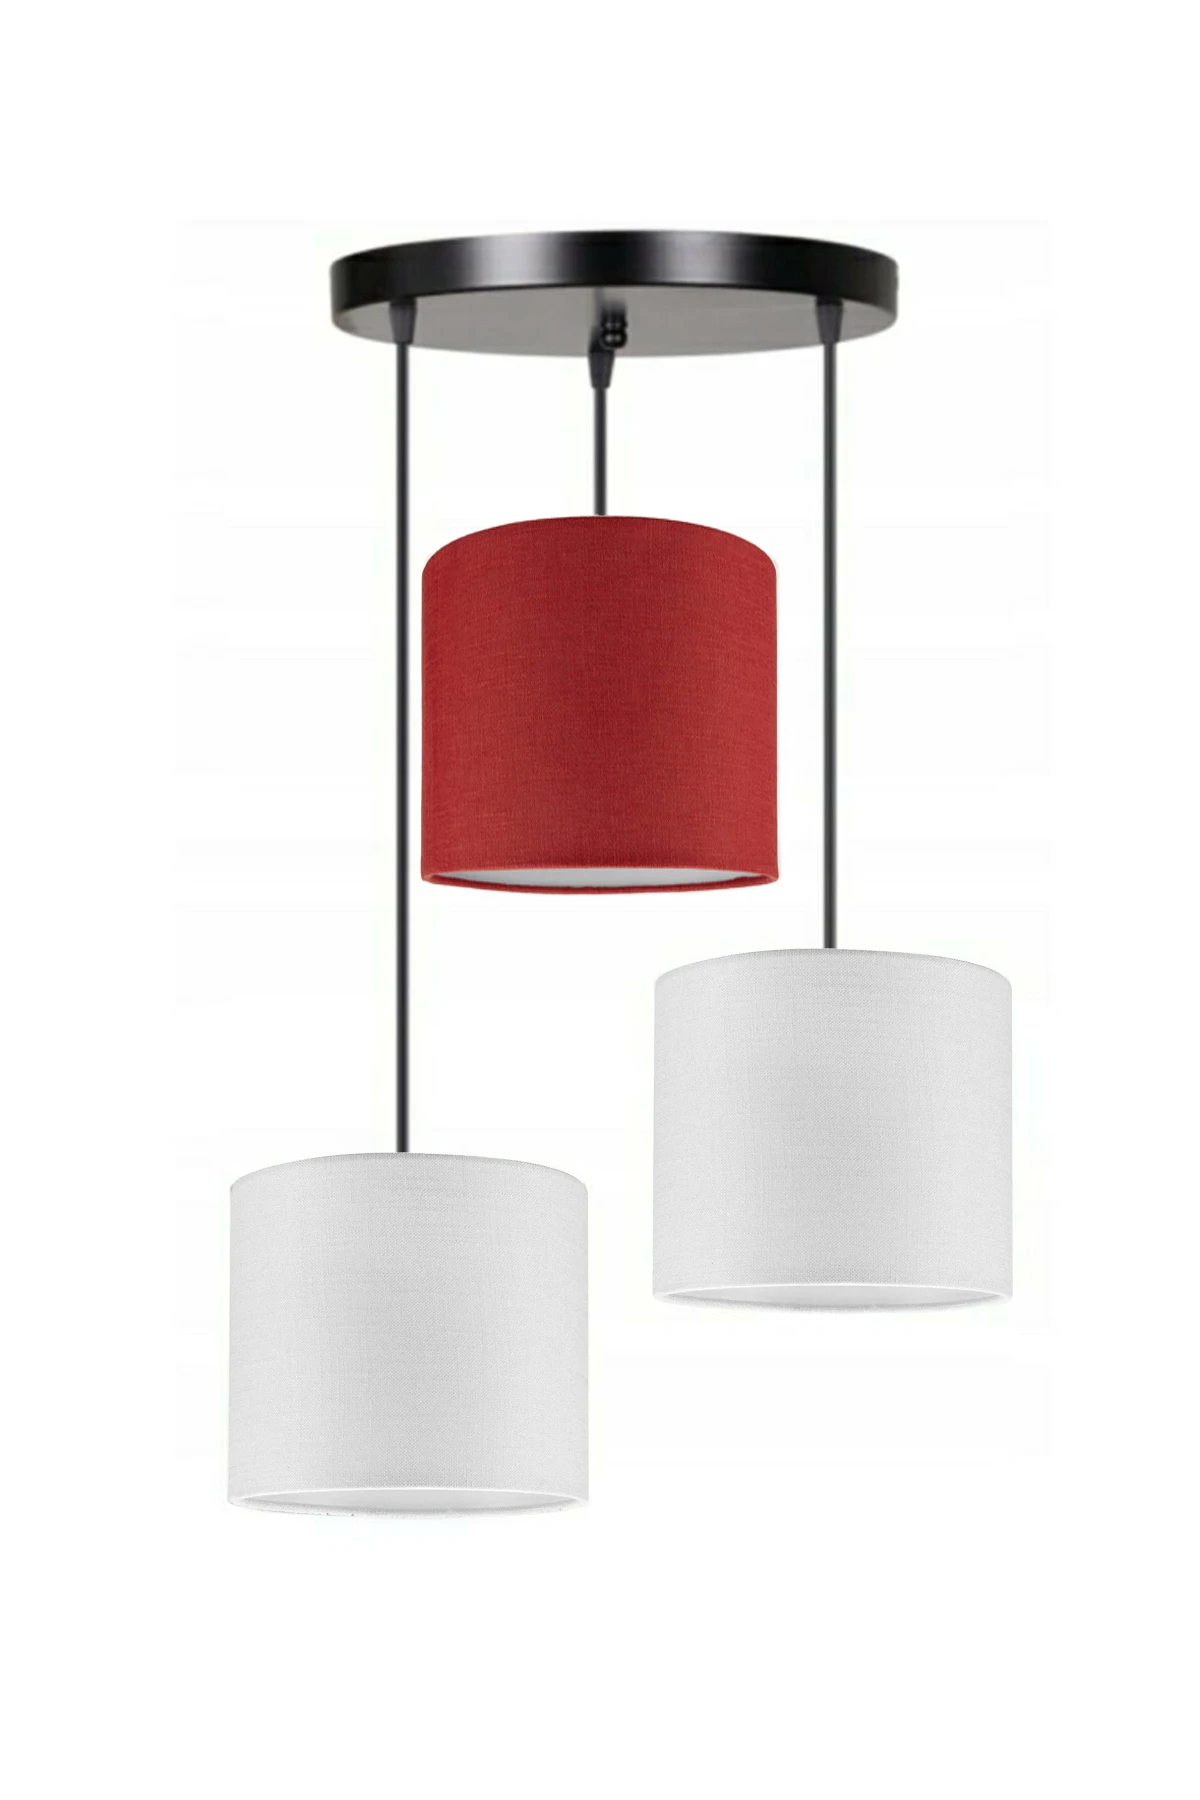 3 Heads 2 White 1 Red Cylinder Fabric Lampshade Pendant Lamp Chandelier Modern Decorative Design For Home Hotel Office Use